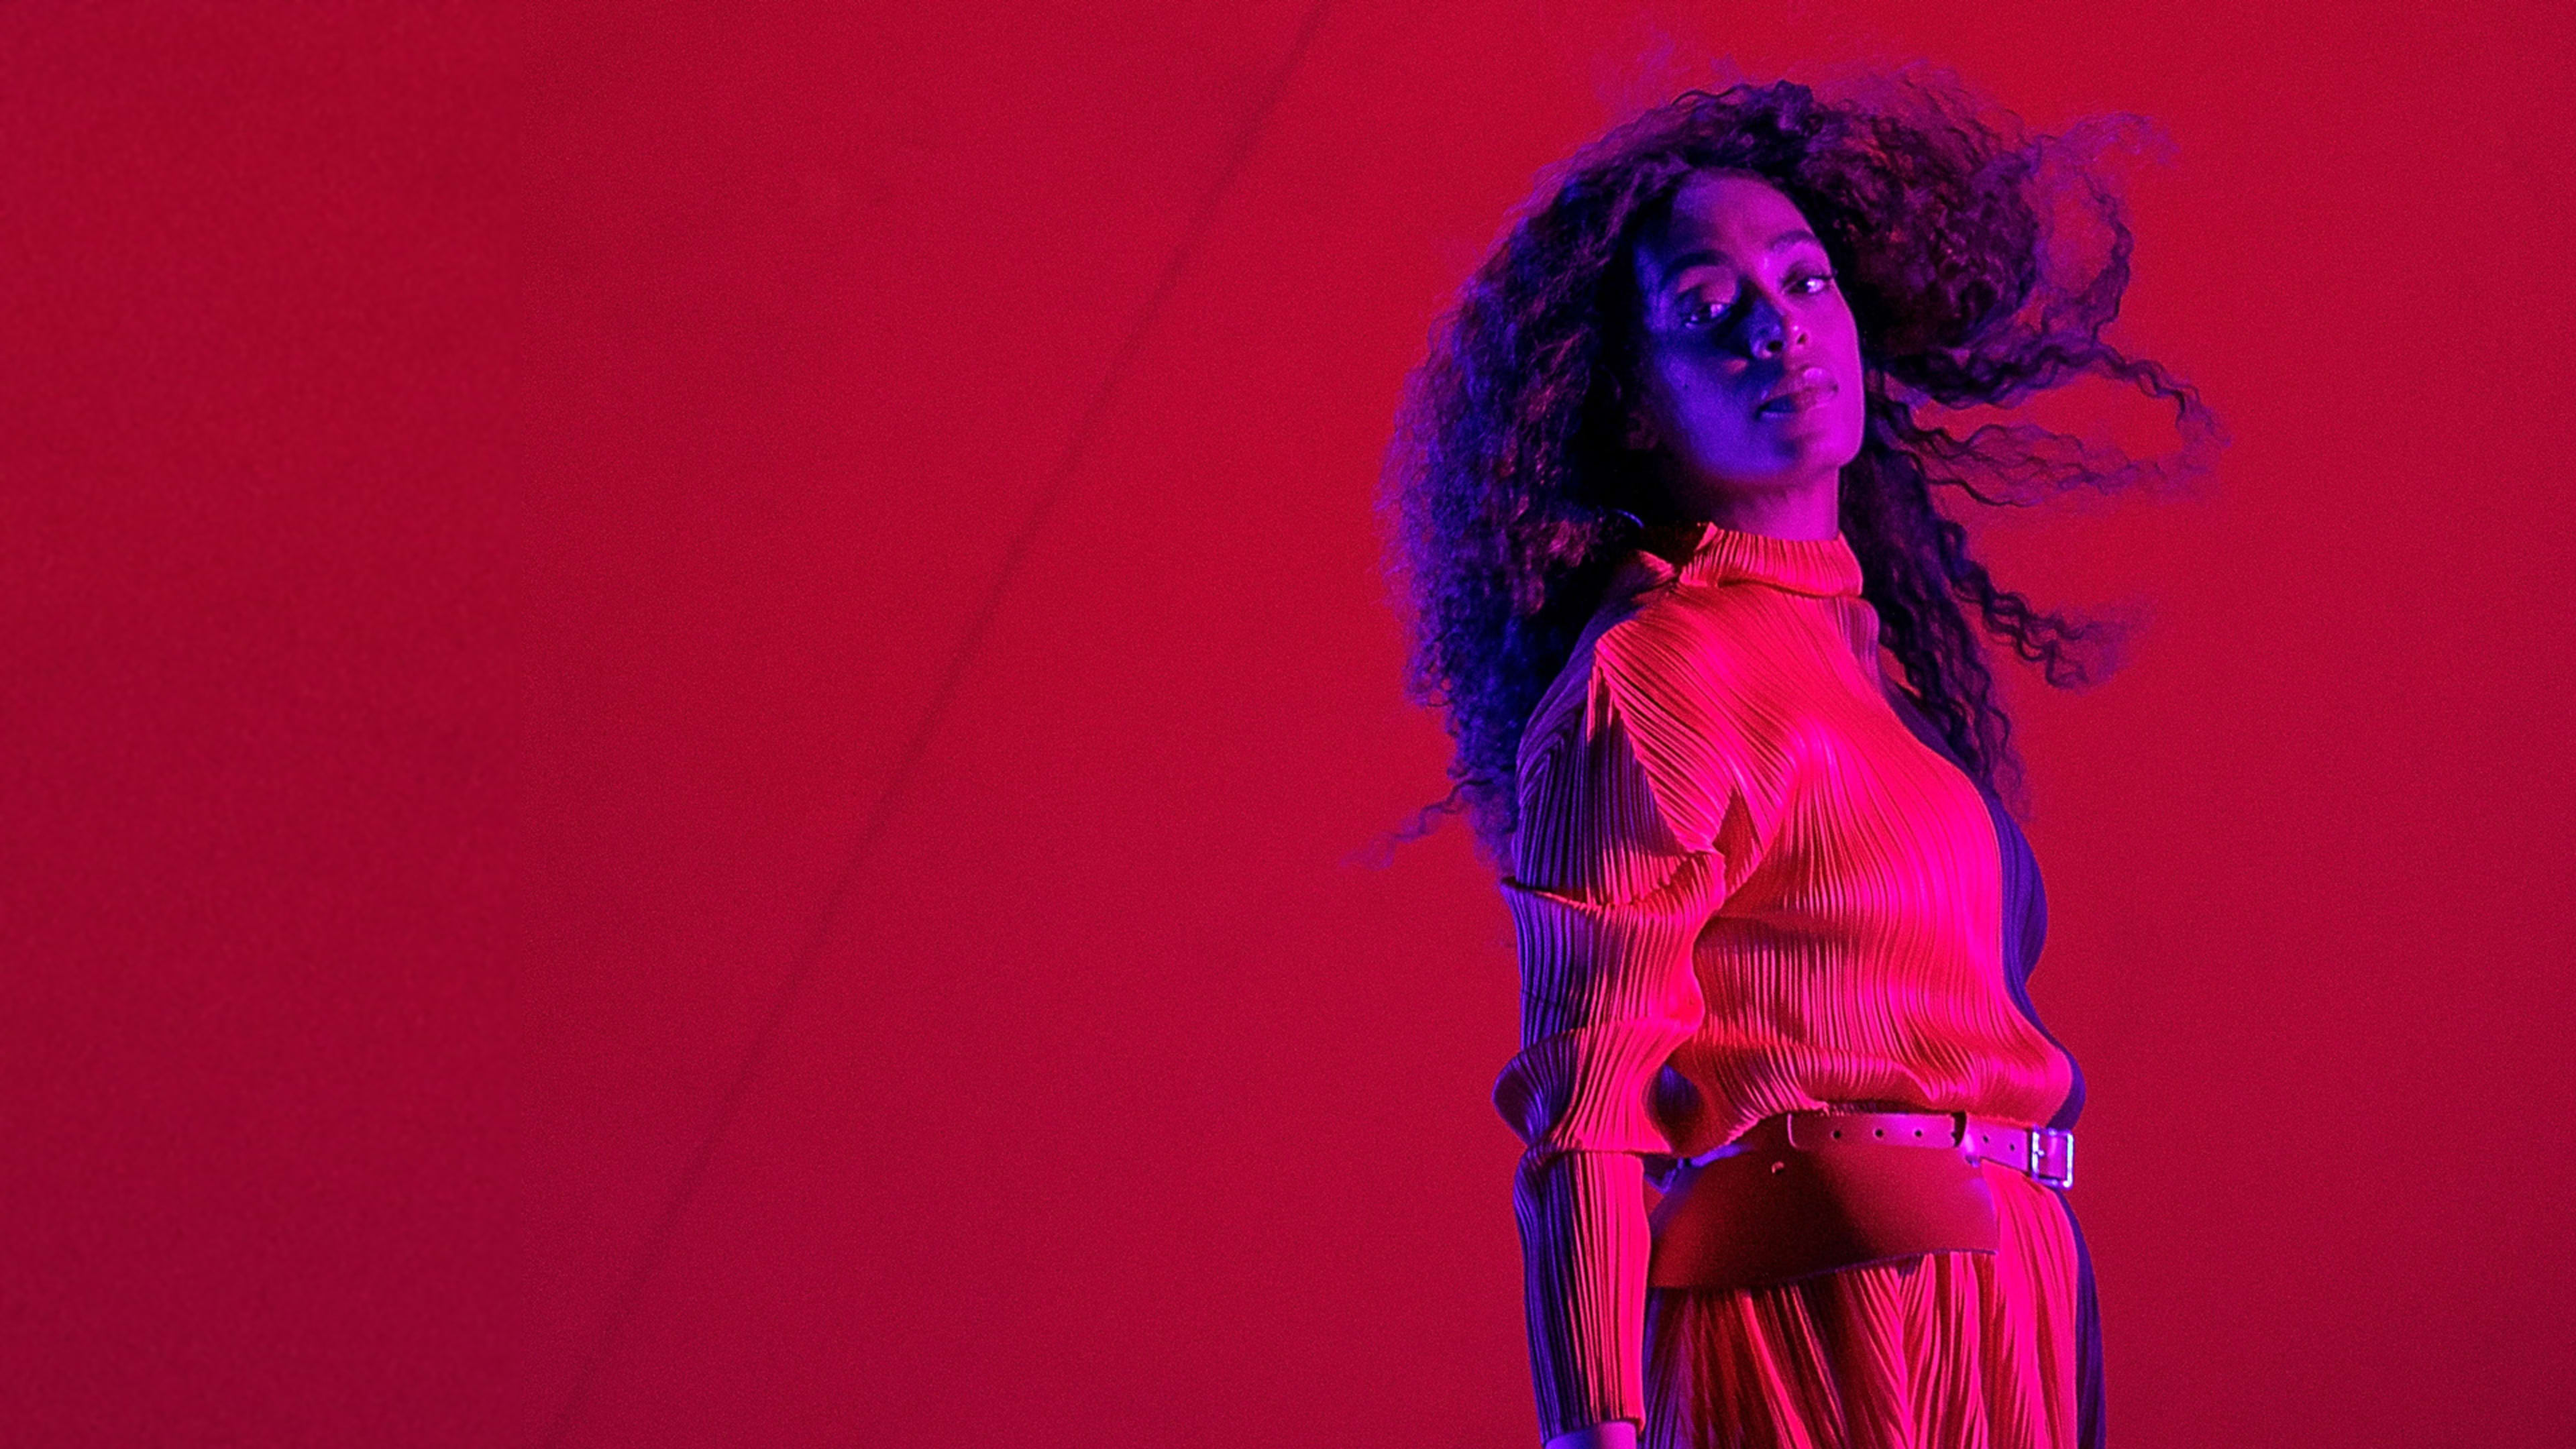 Why Solange Had To Throw Salt On Her Wounds In Order To Heal